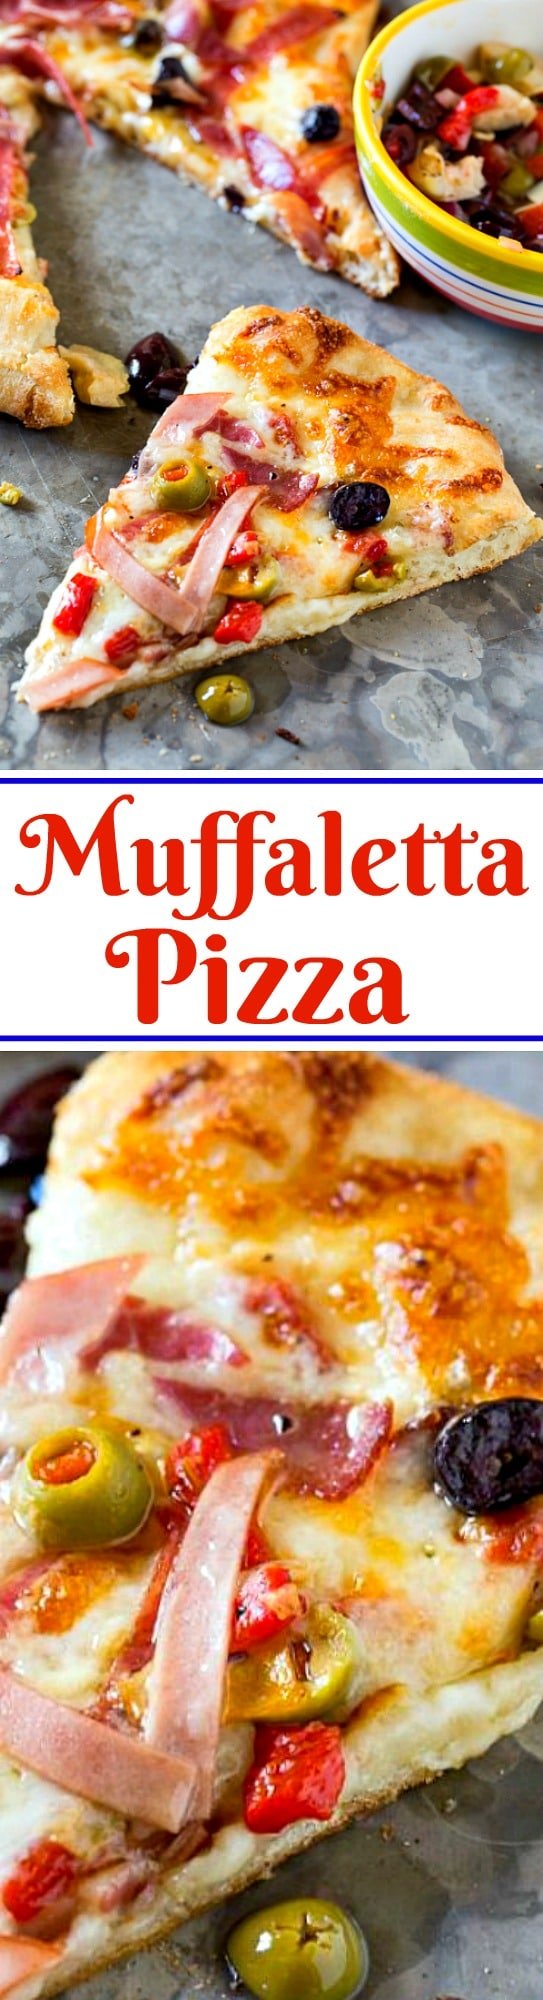 Muffaletta Pizza with all the flavors of the famous New Orleans sandwich.